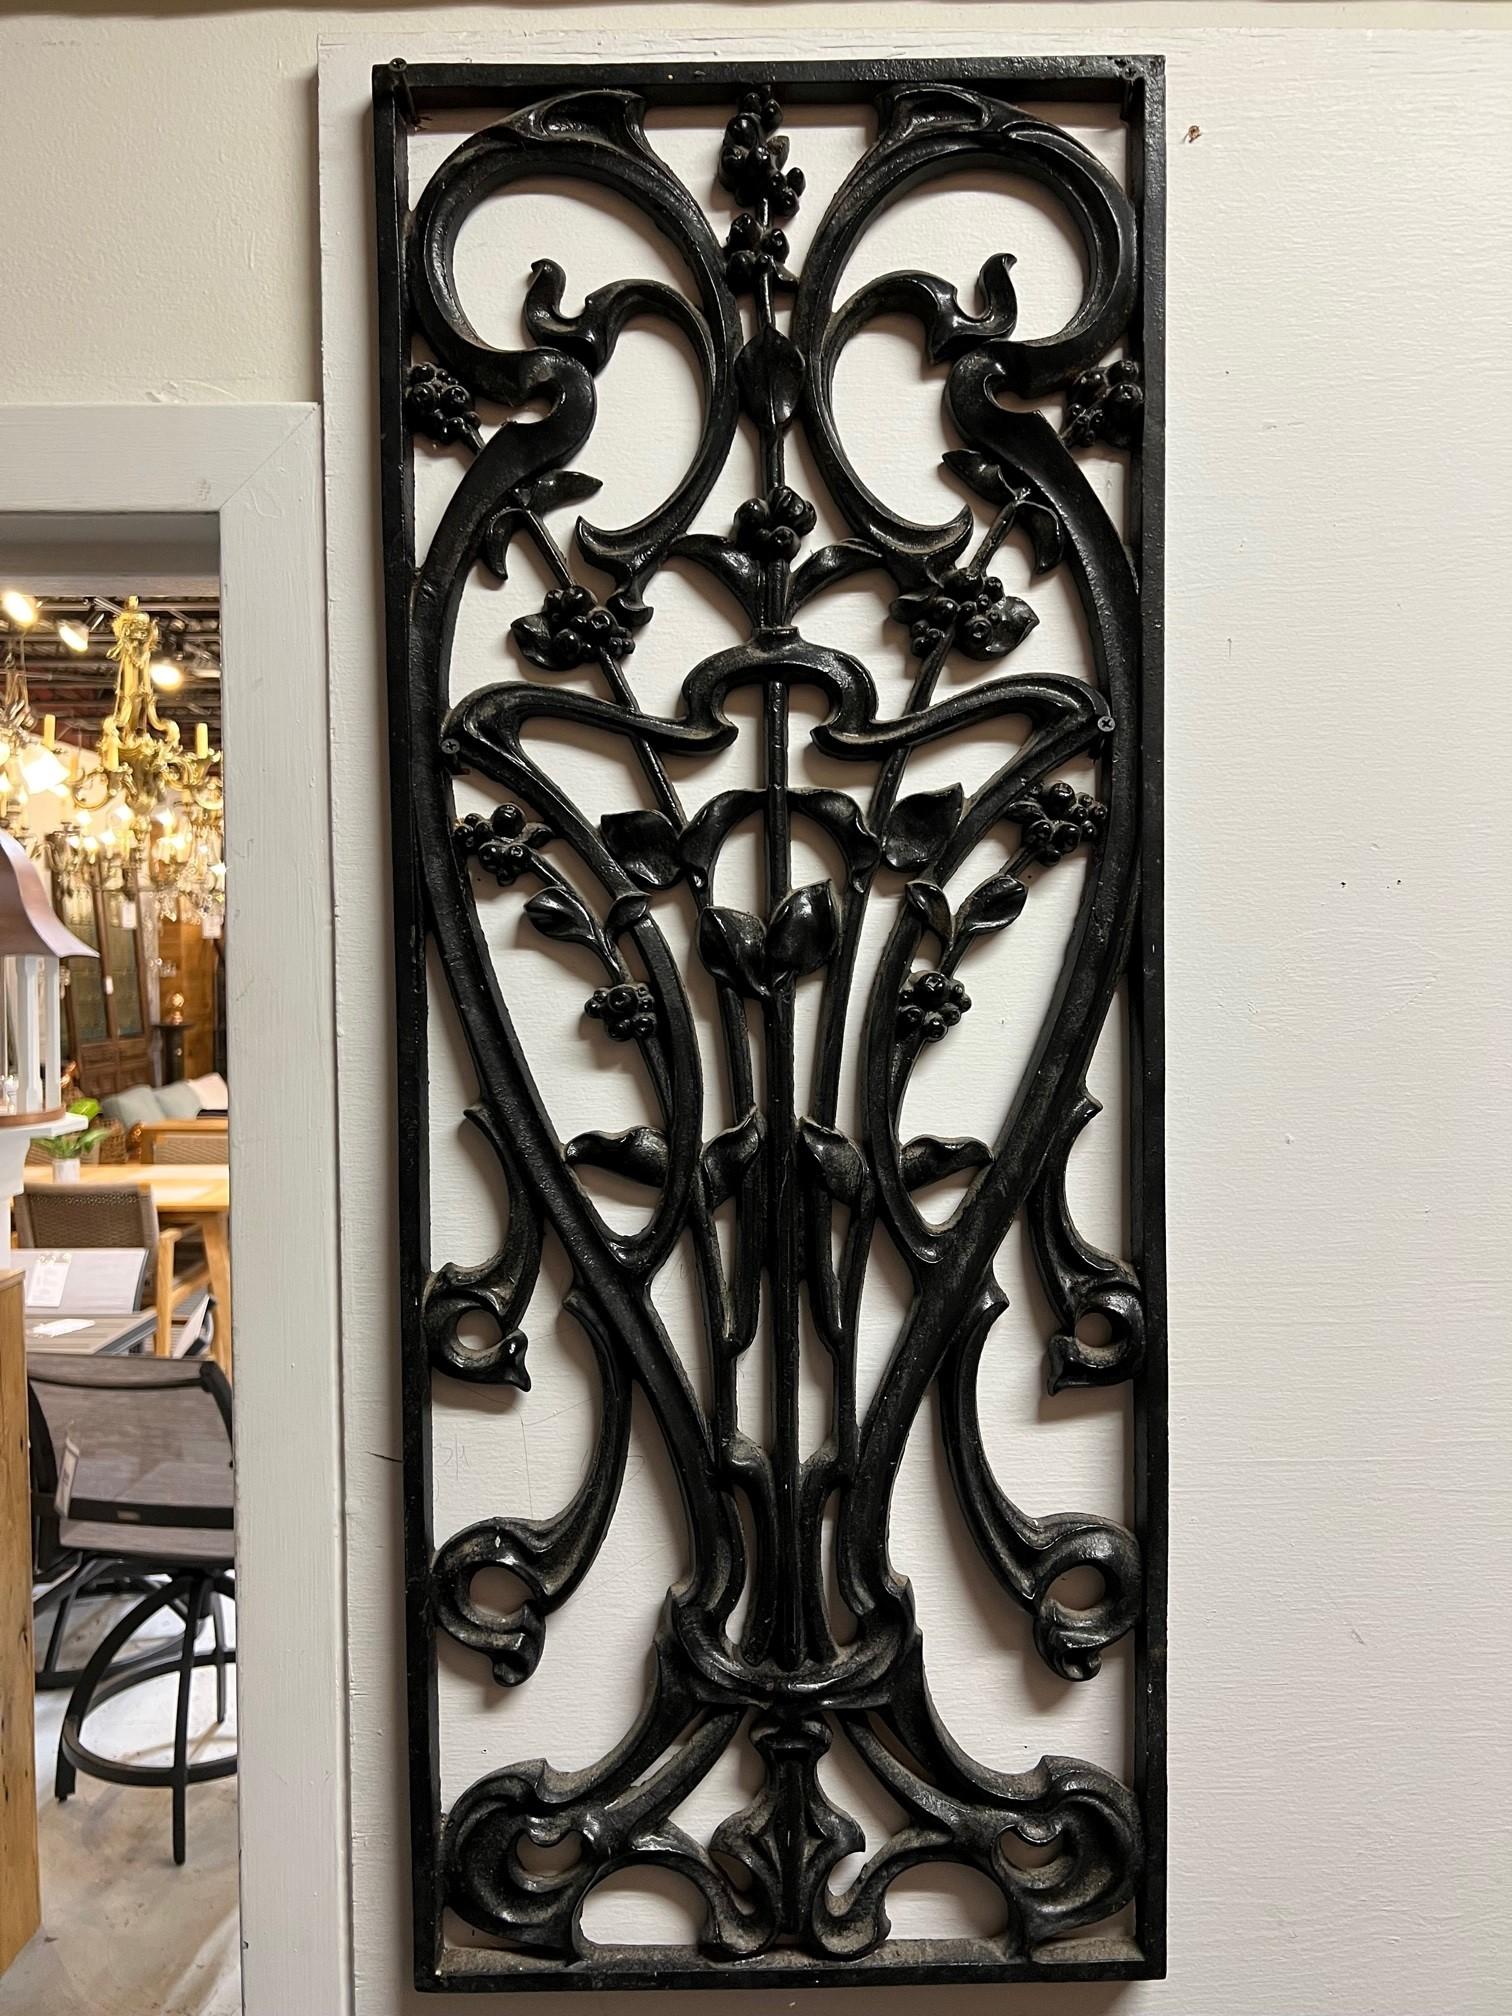 Beautiful early 20th century antique French Art Nouveau iron panel purchased from the markets in Paris France. This is a wonderful iron panel in great condition brought over from Paris France and would look amazing hanging on a interior or exterior